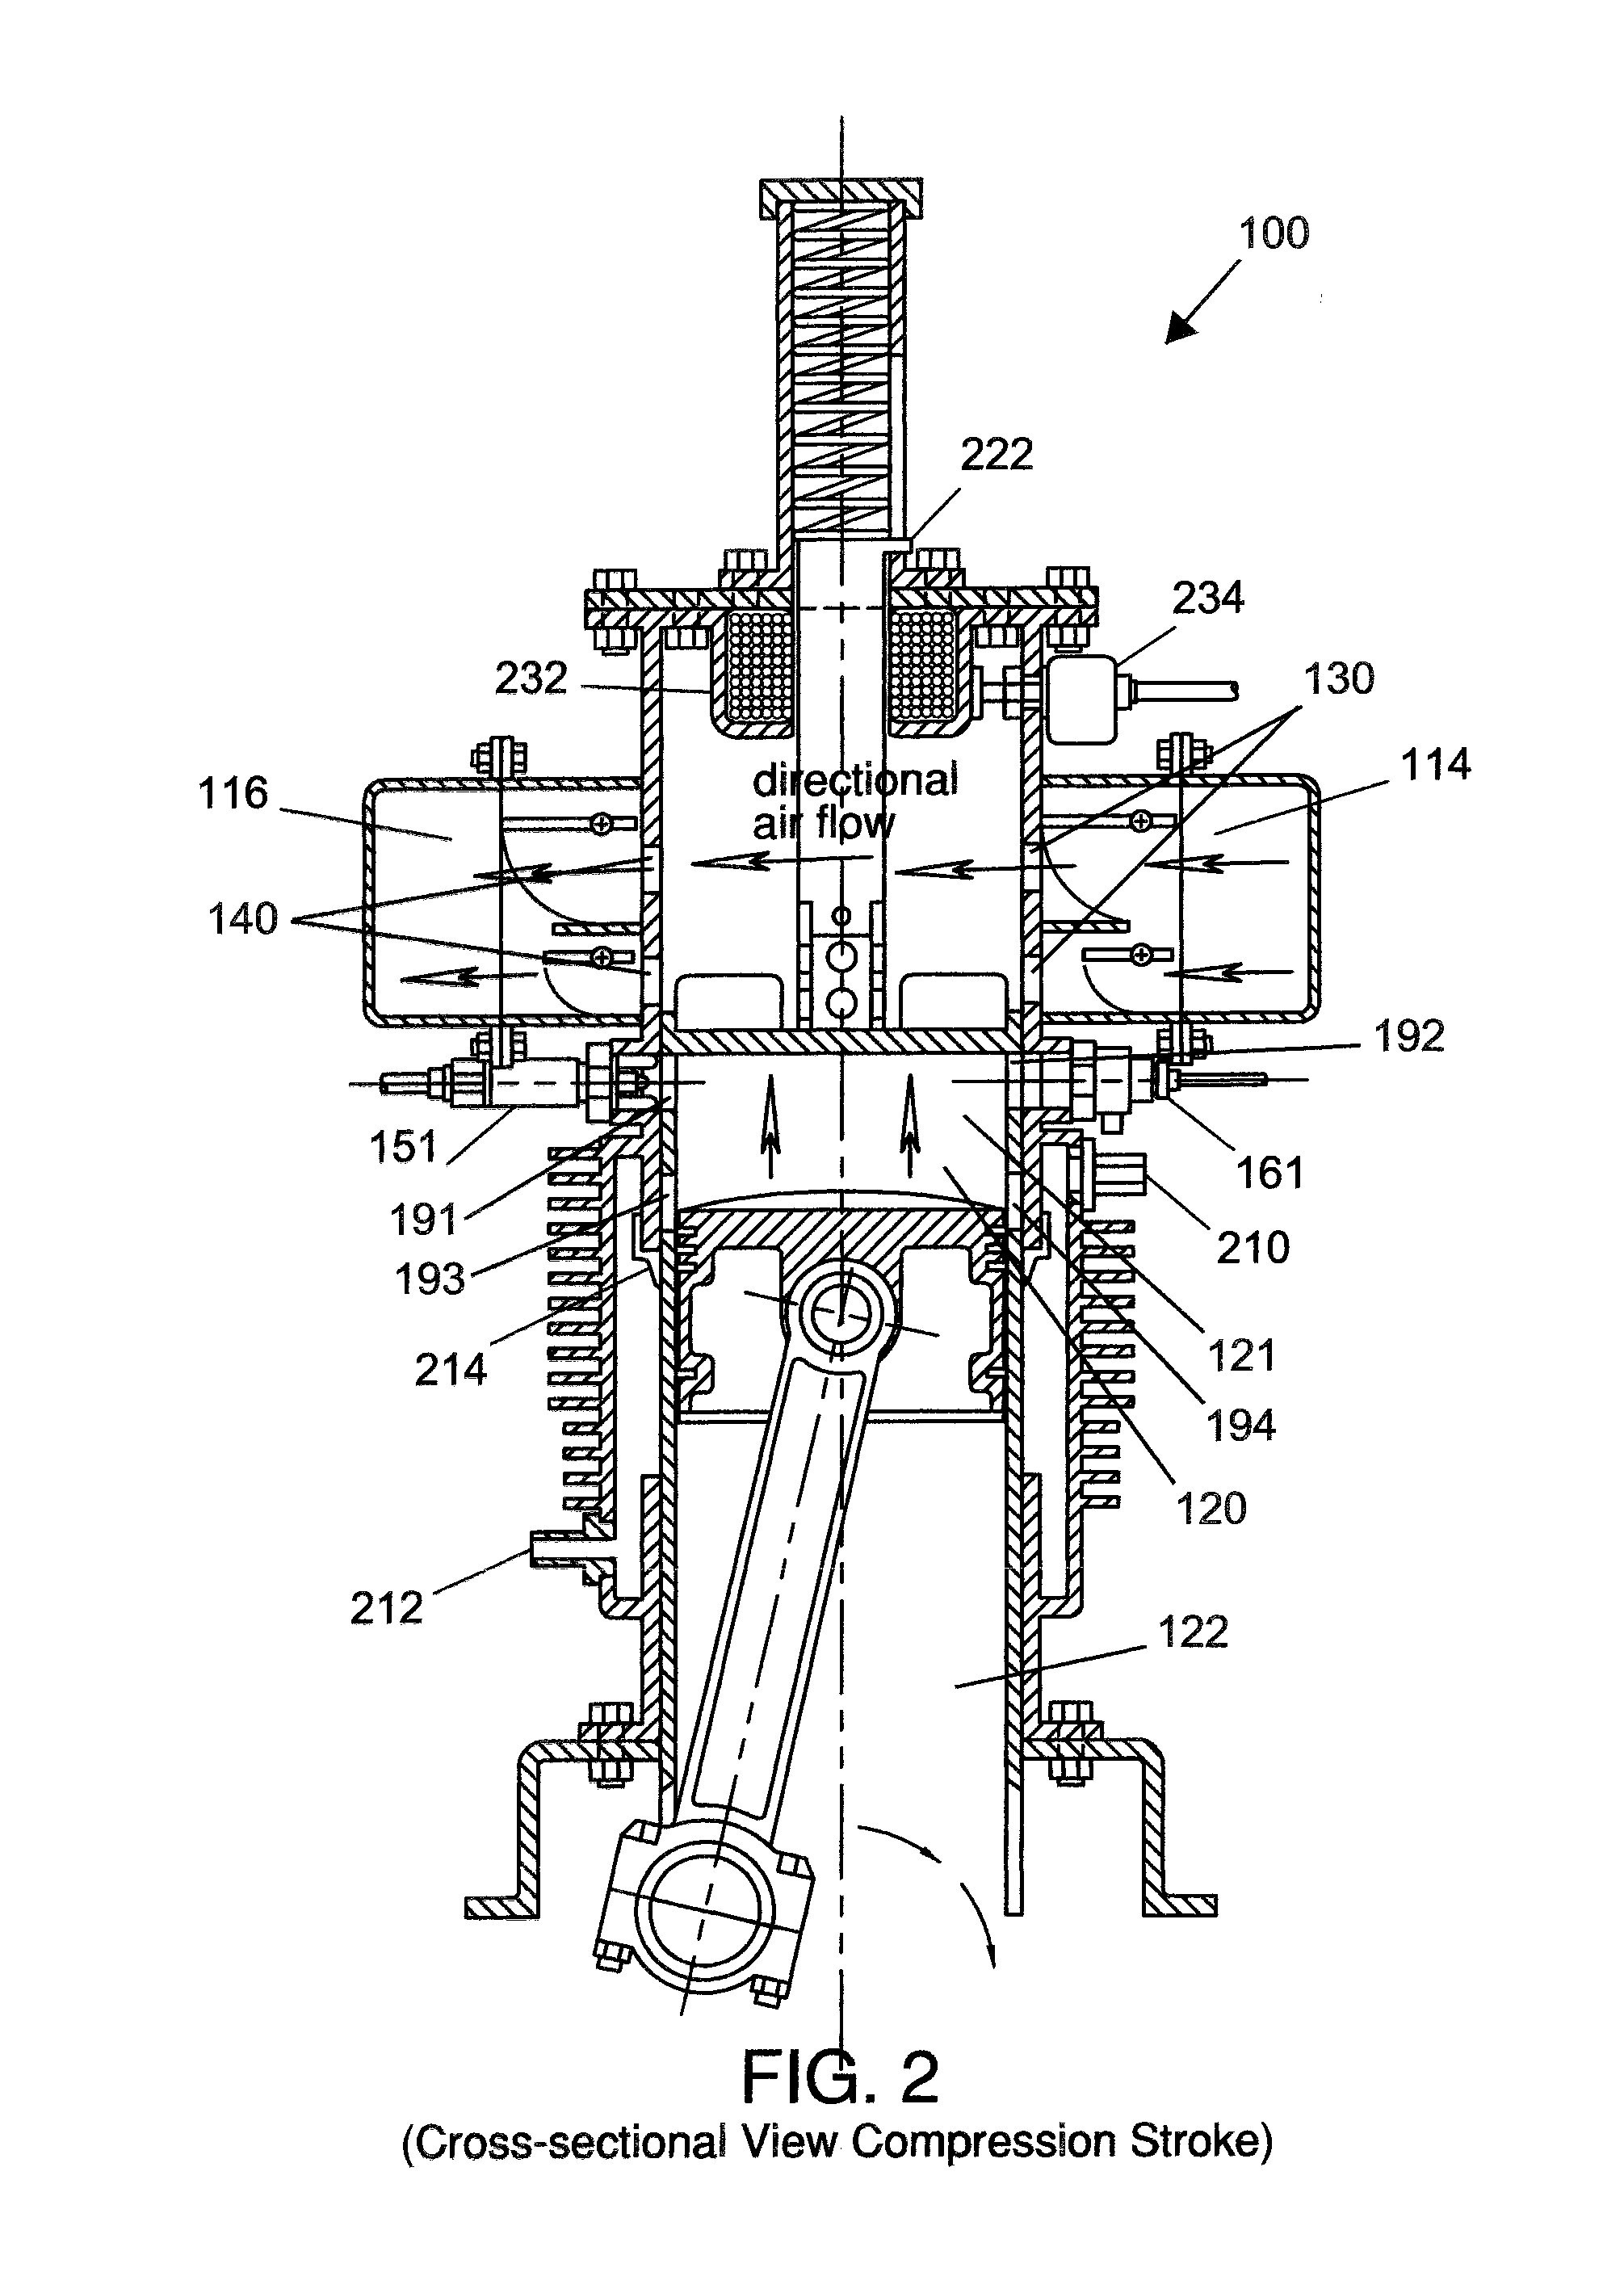 Variable volume combustion chamber system